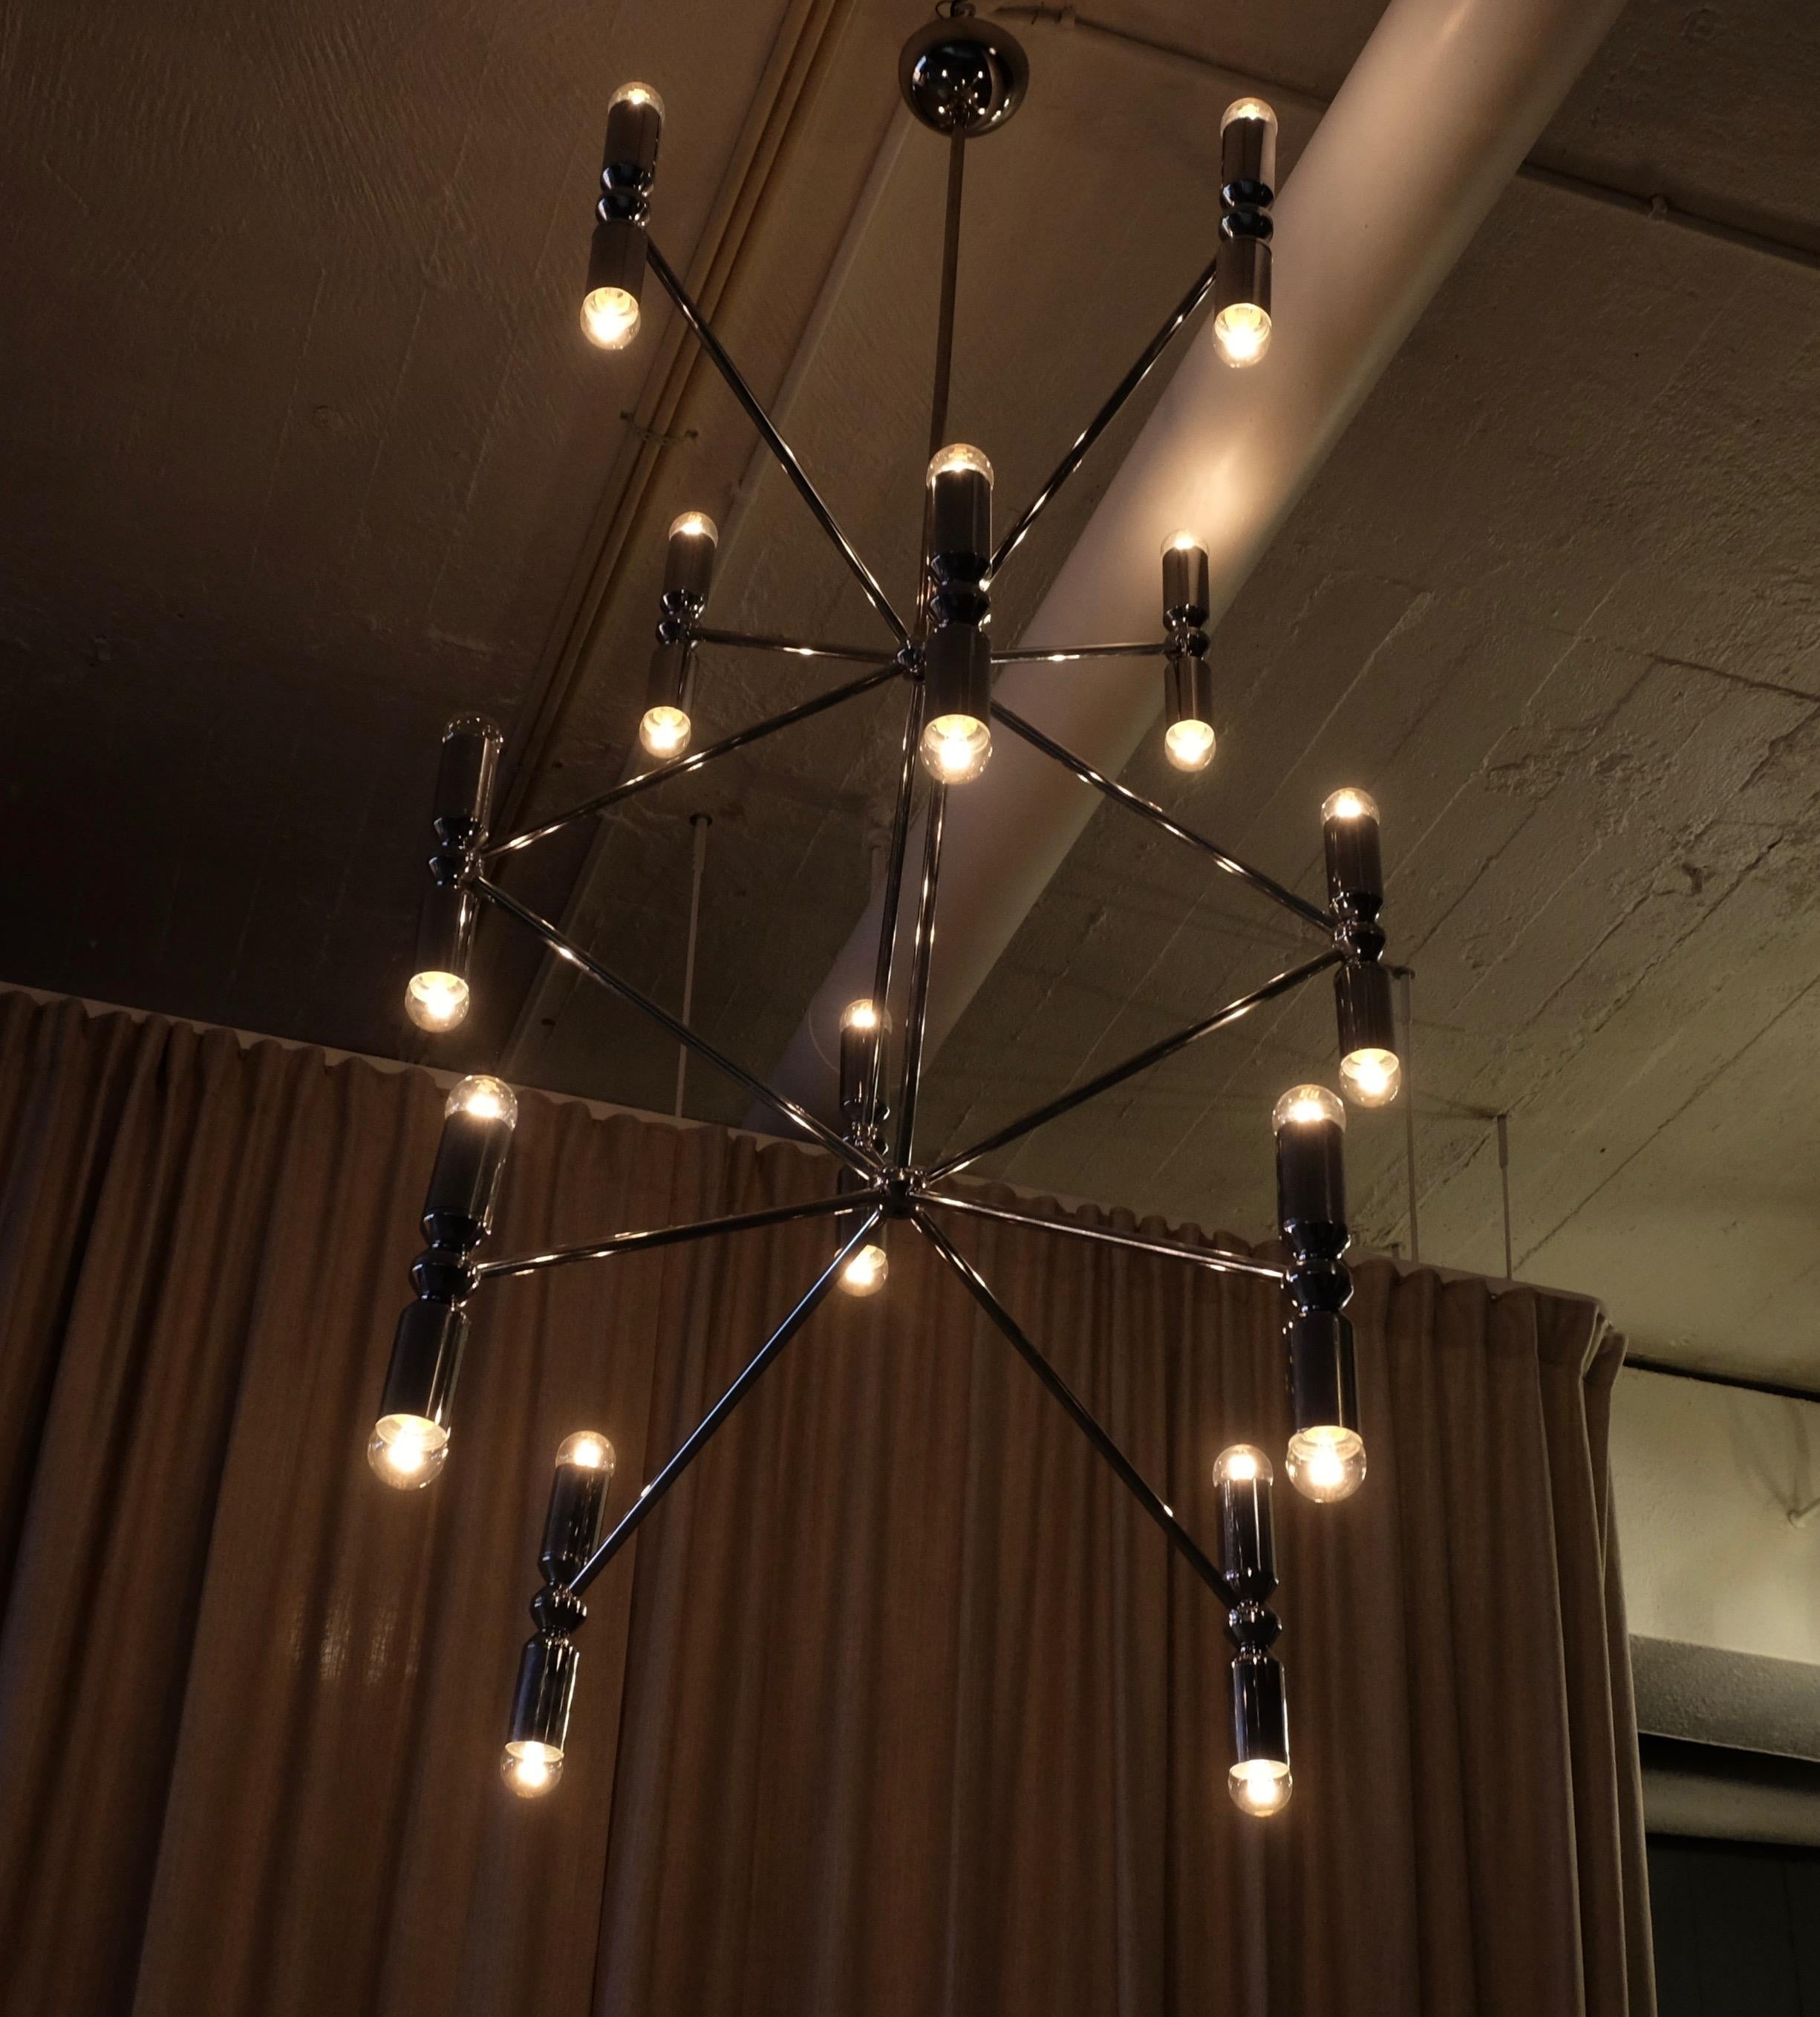 Rare 12-Arm Chandelier with 24 Lights in Chrome, 1970s For Sale 1